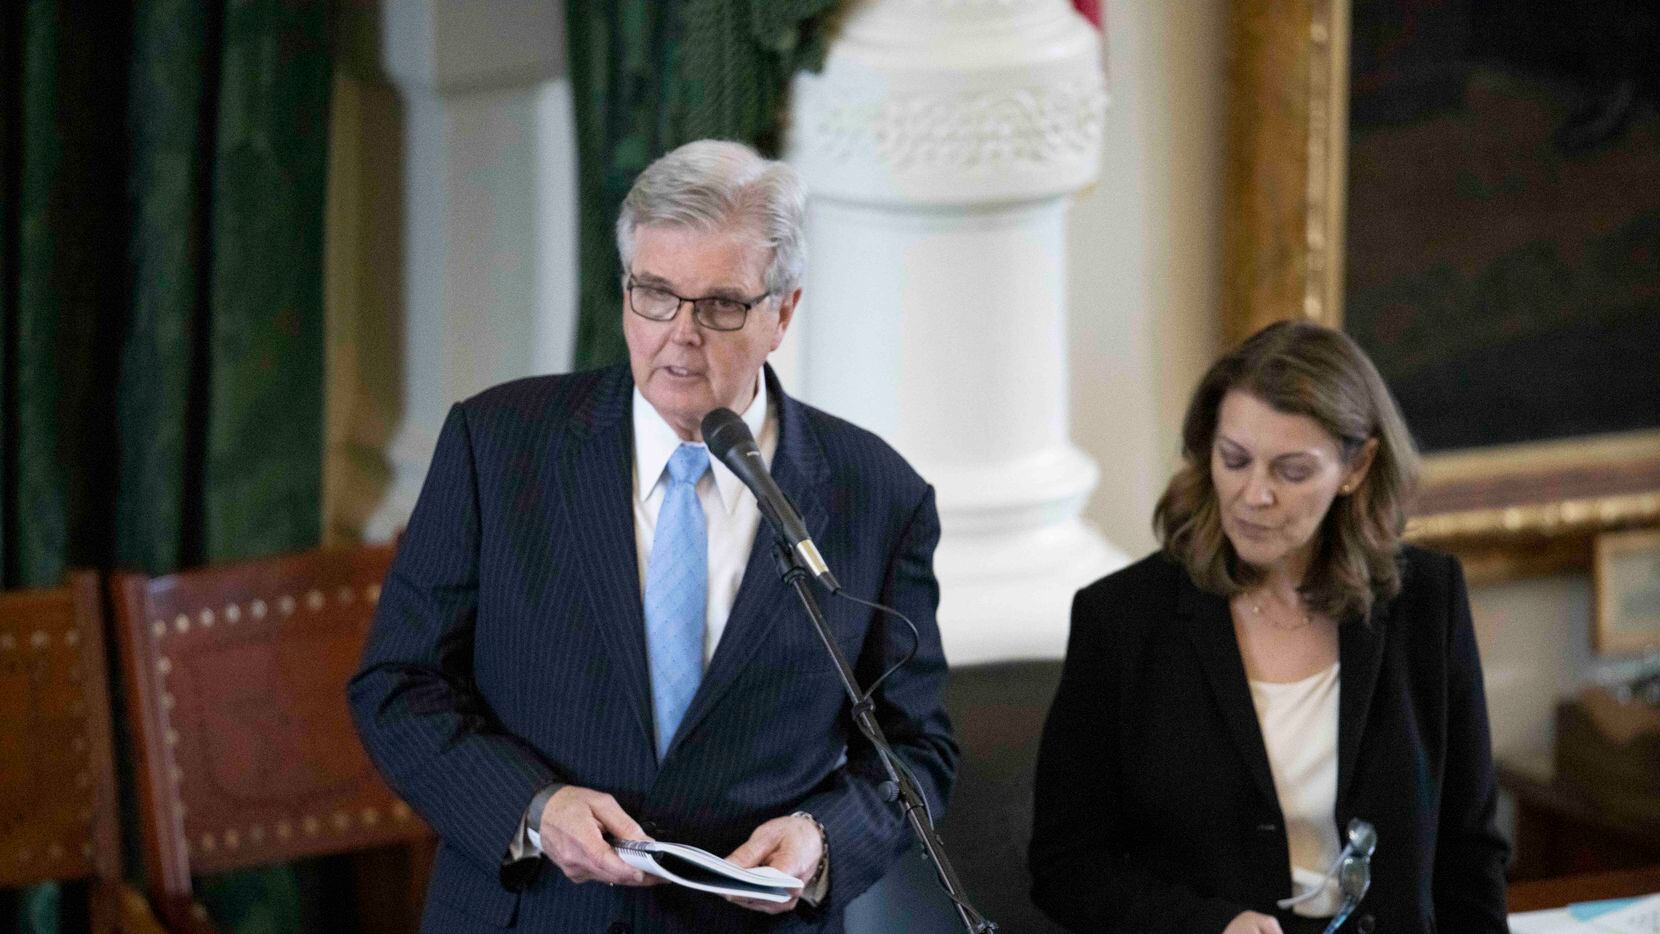 Lt. Gov. Dan Patrick reads from a rule book as Senate Democrats ask pointed questions on a revision to SB 7 the voting rights bill under consideration Saturday night May 29, 2021. At right is Senate Parliamentarian Karina Davis.  (Bob Daemmrich/Special Contributor) 